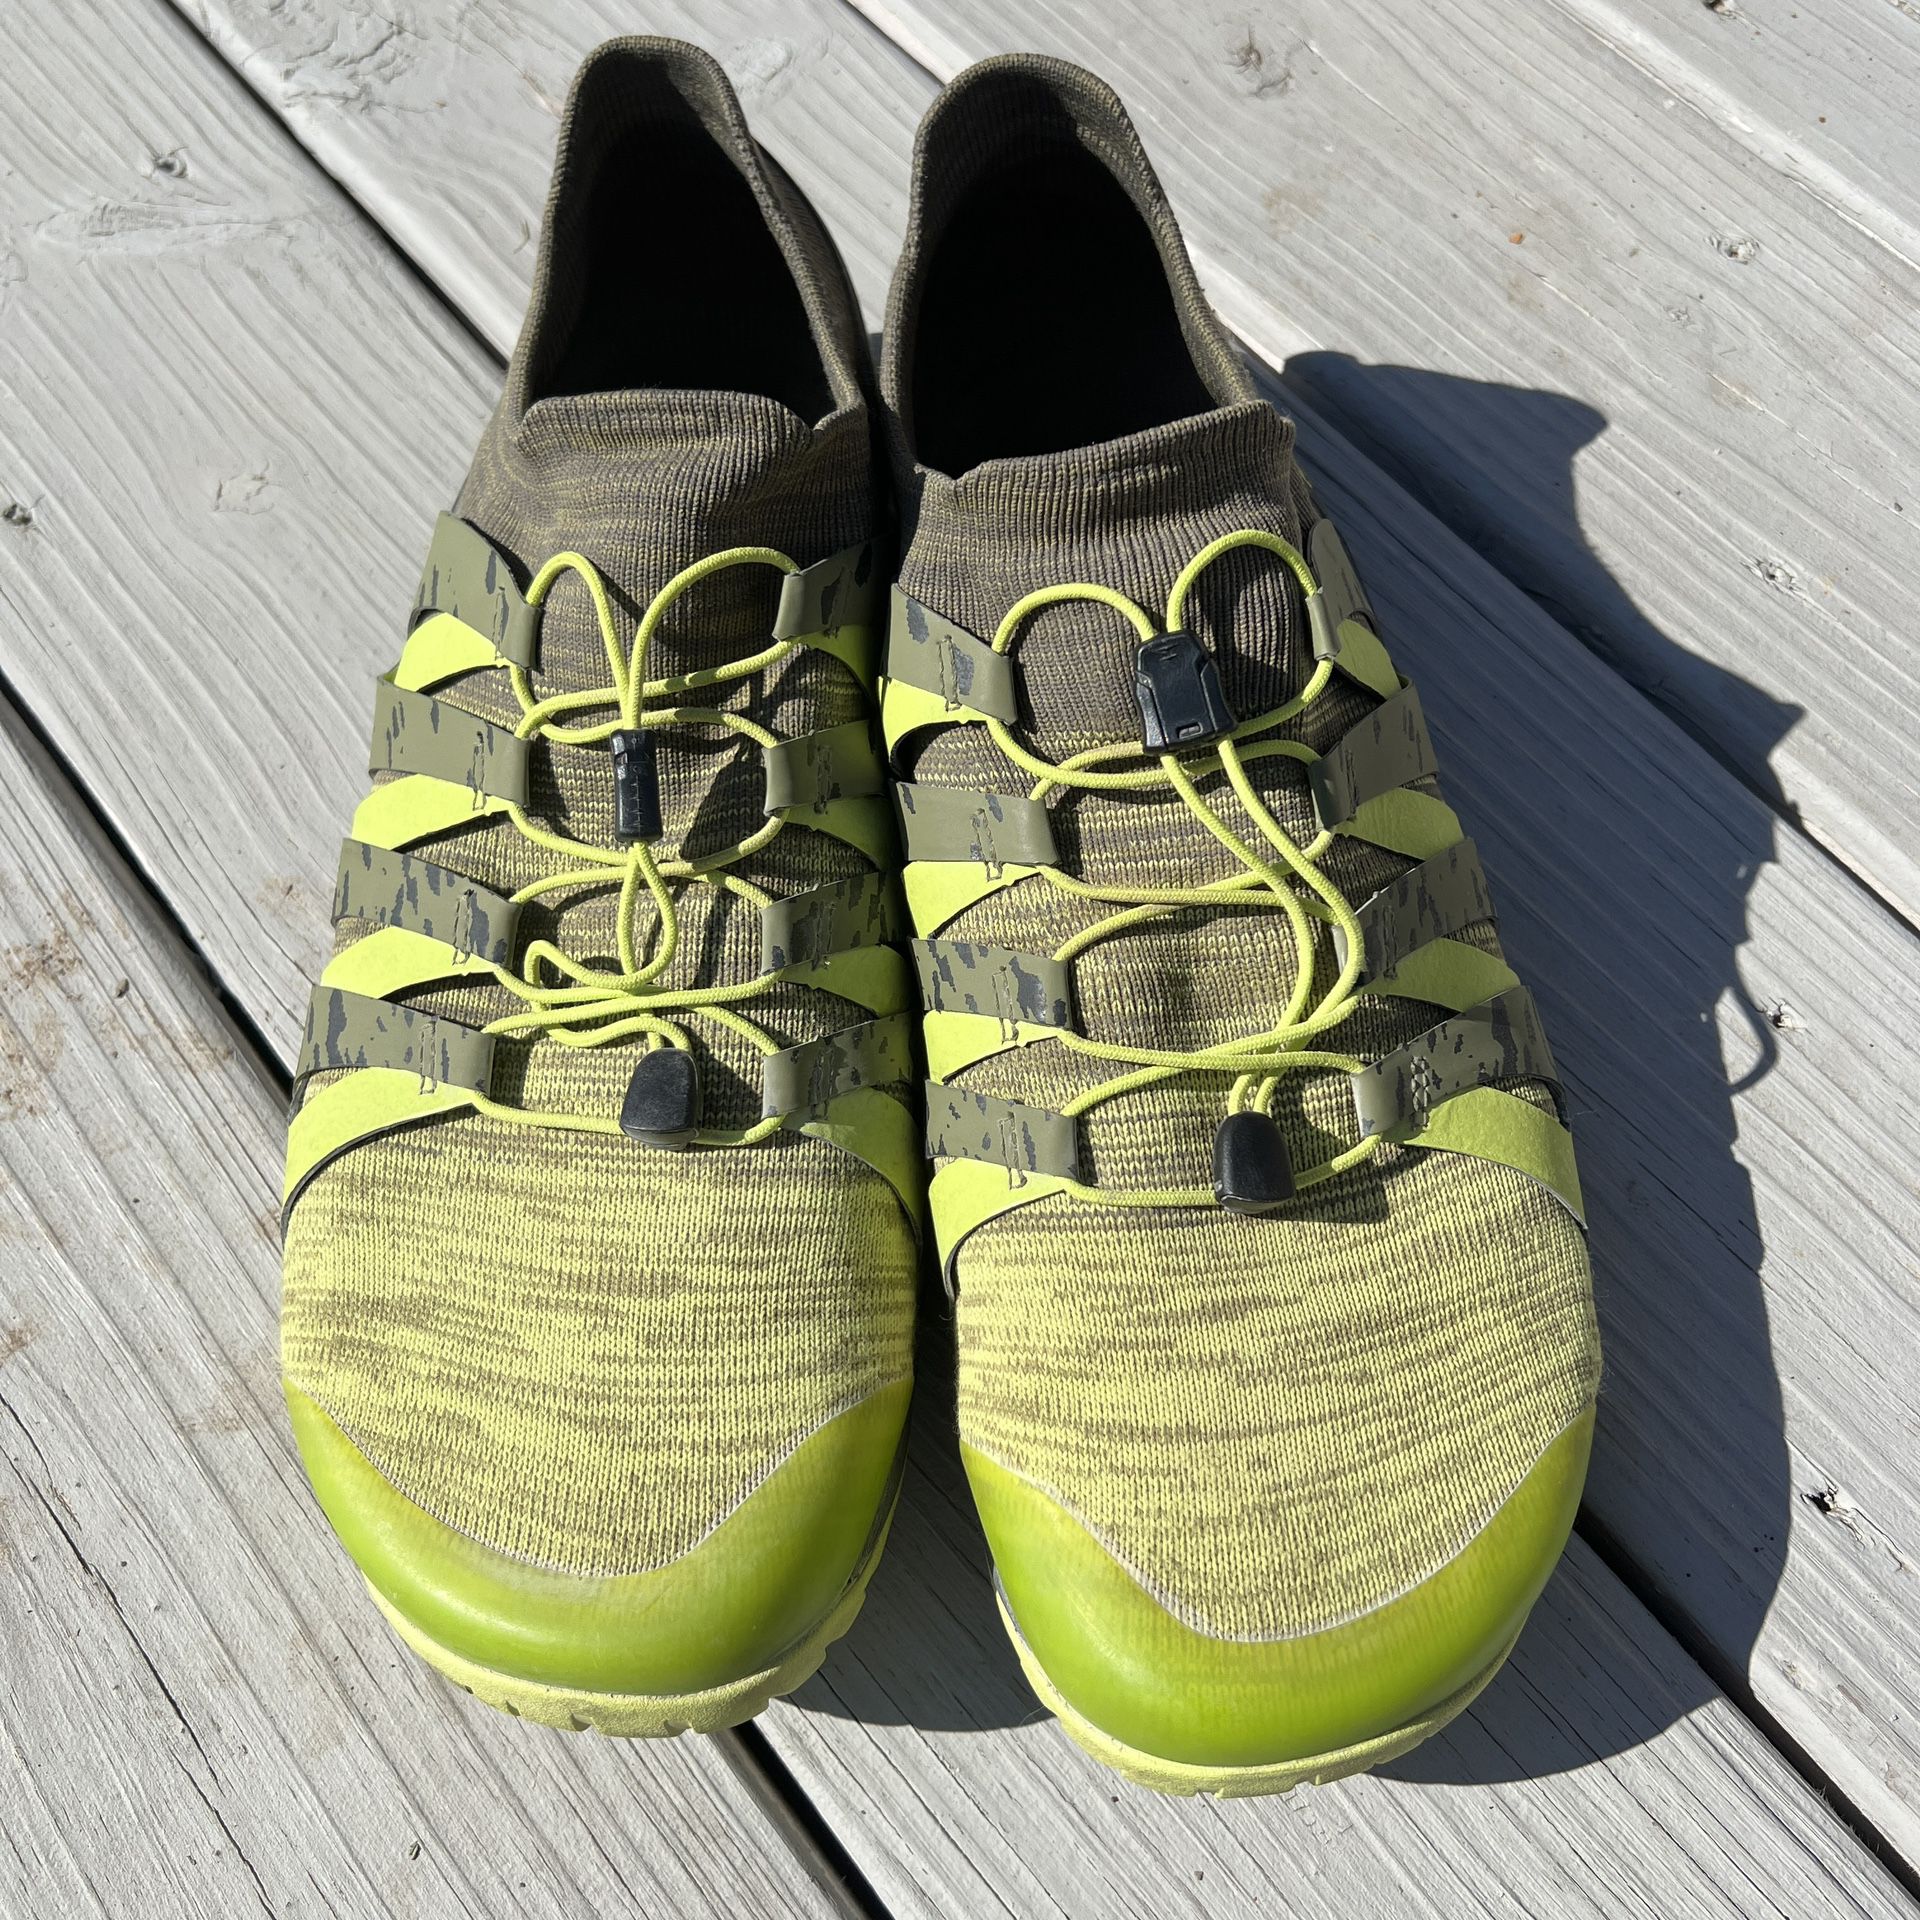 Merrell Trail Glove 5 3D Running Shoes for Sale San Antonio, TX - OfferUp